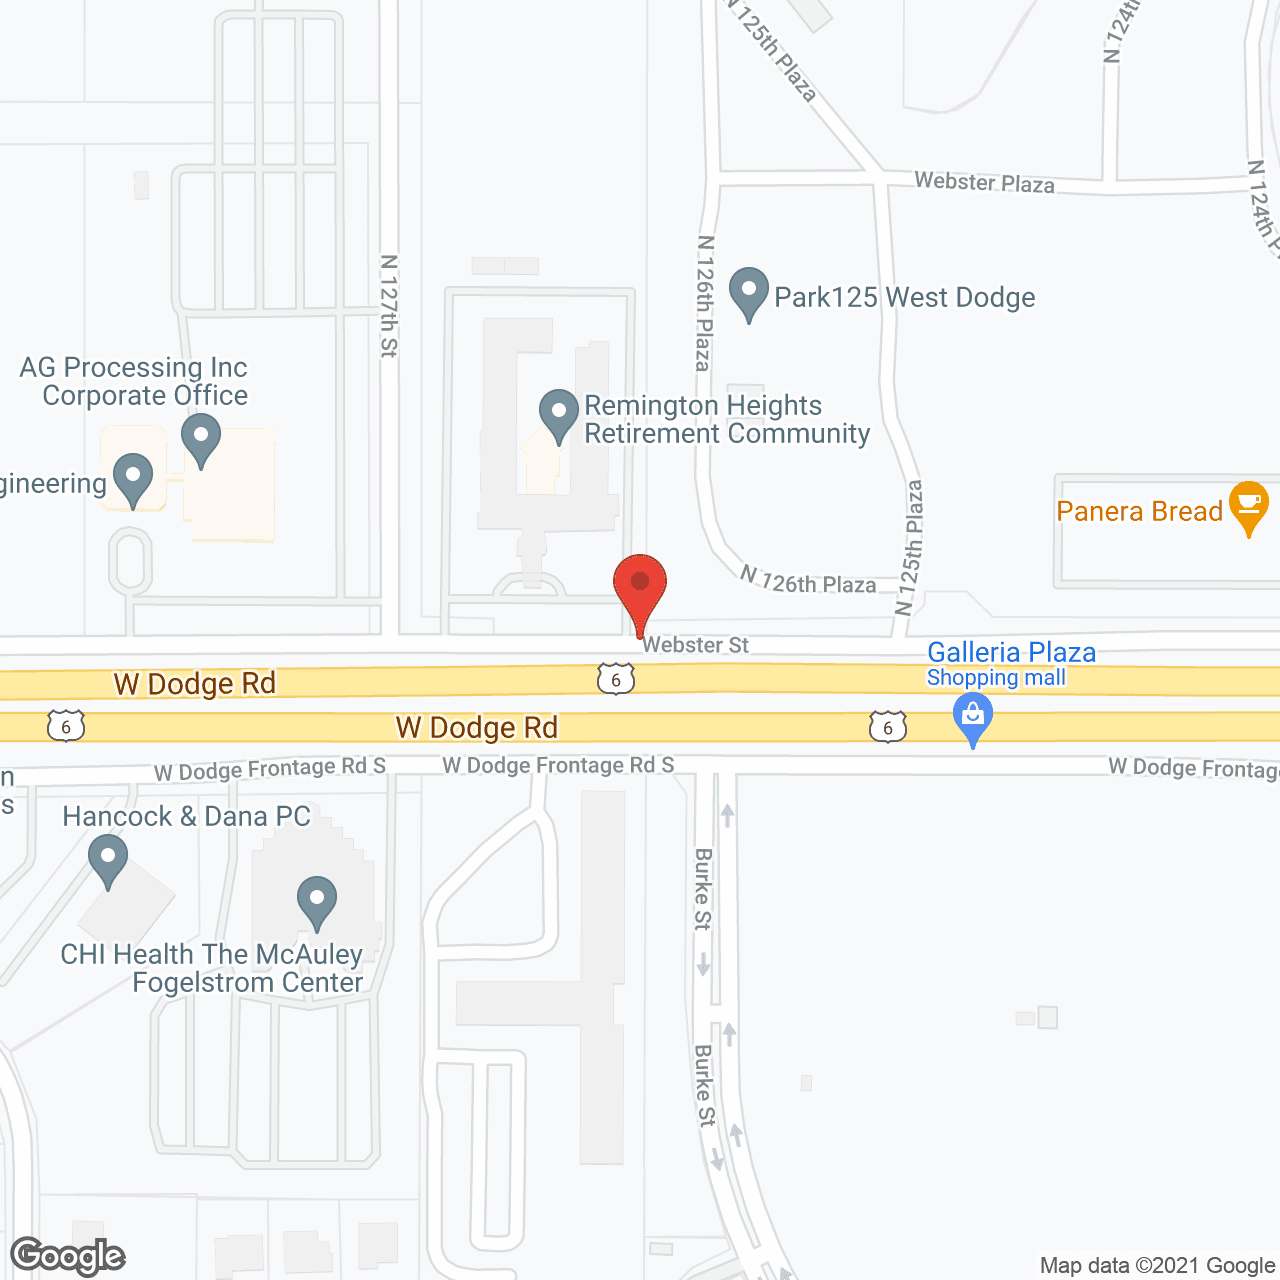 Remington Heights Retirement Community in google map